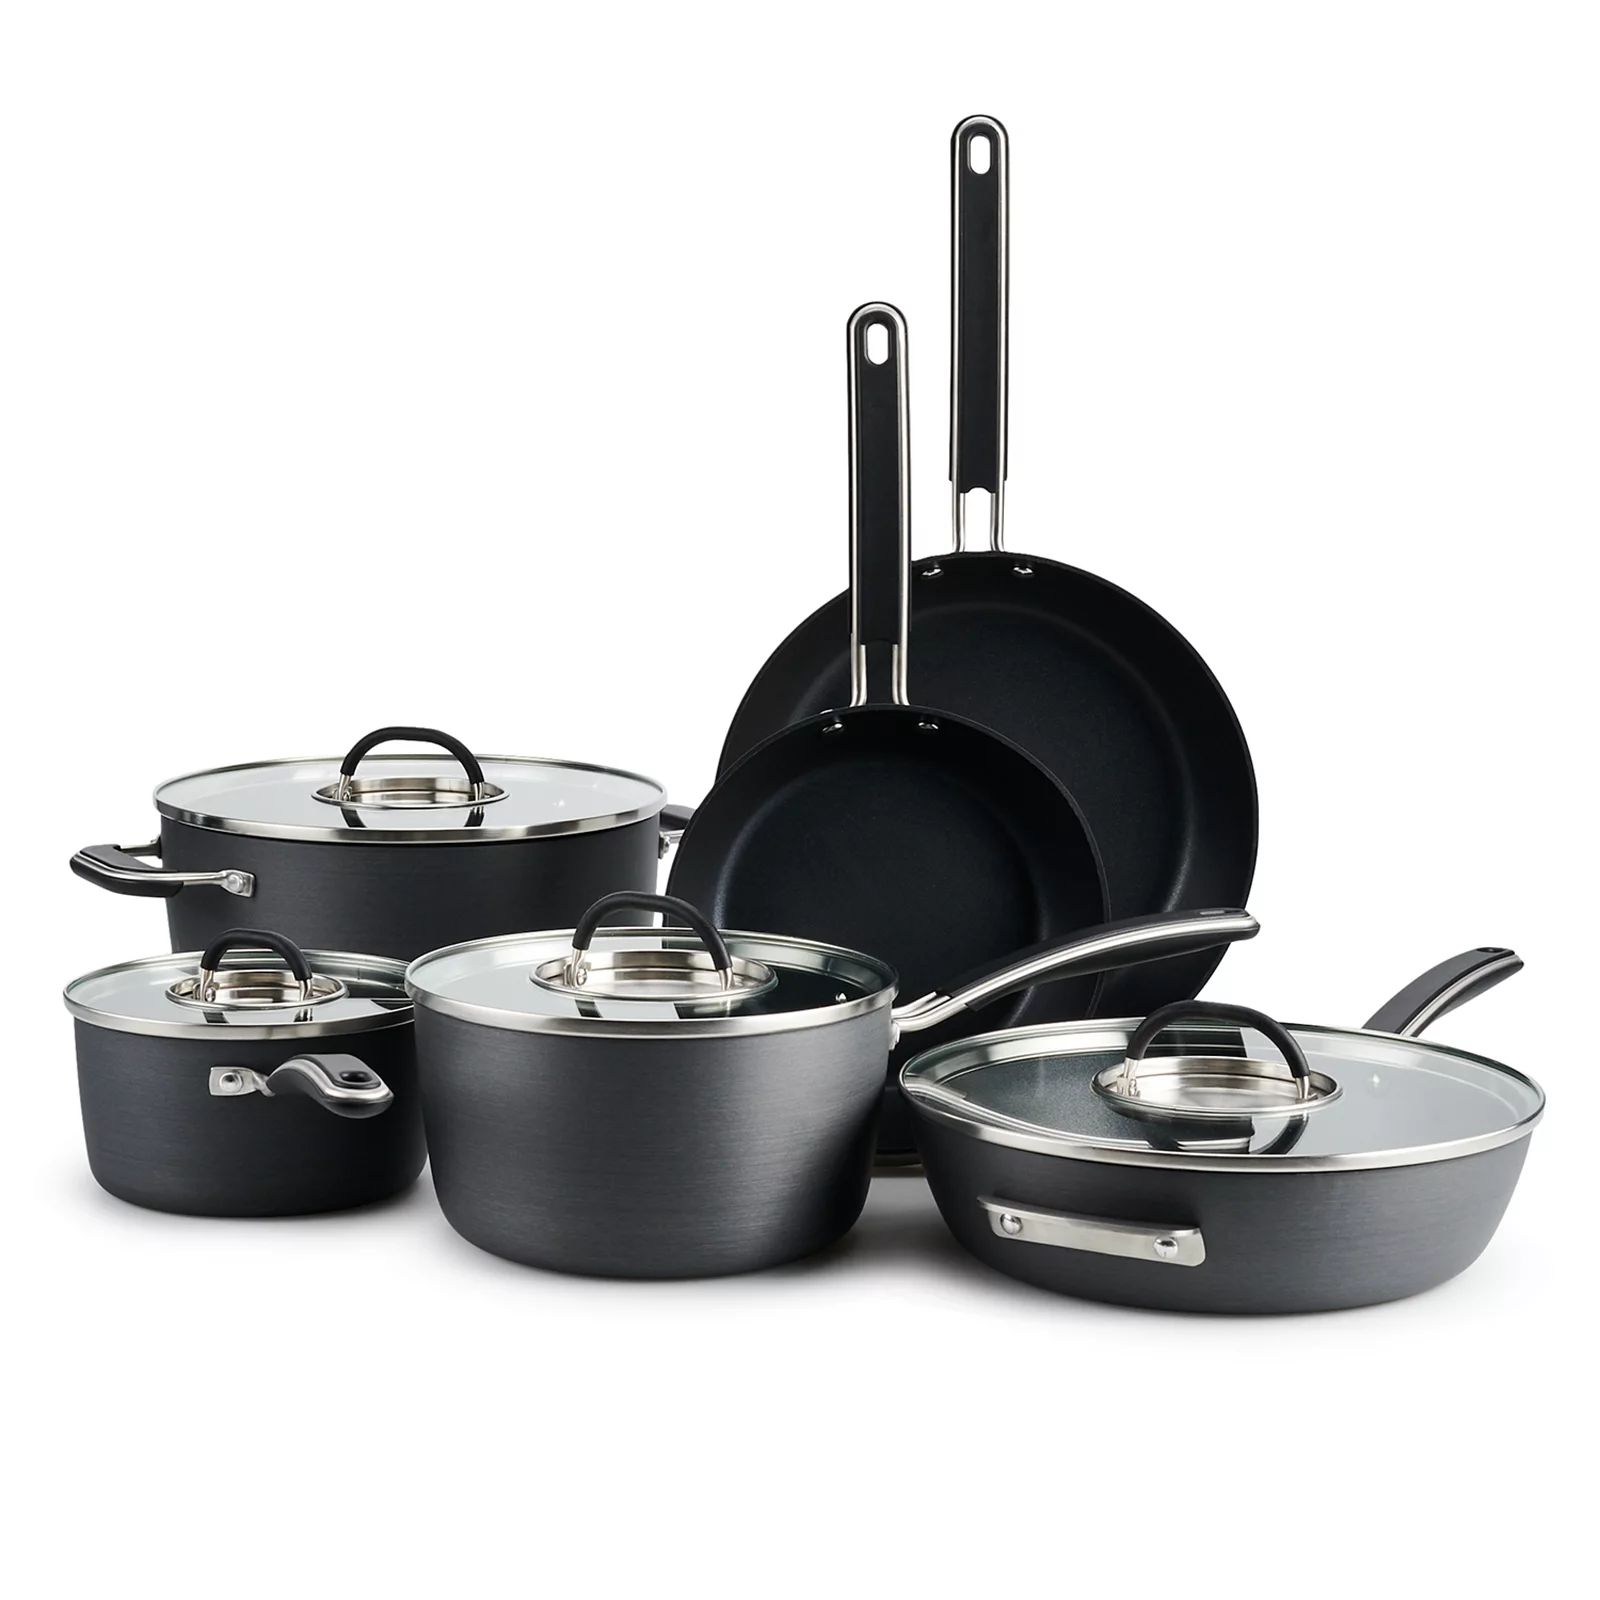 Food Network 10-pc. Hard-Anodized Nonstick Cookware Set, Light Grey, 10PC | Kohl's